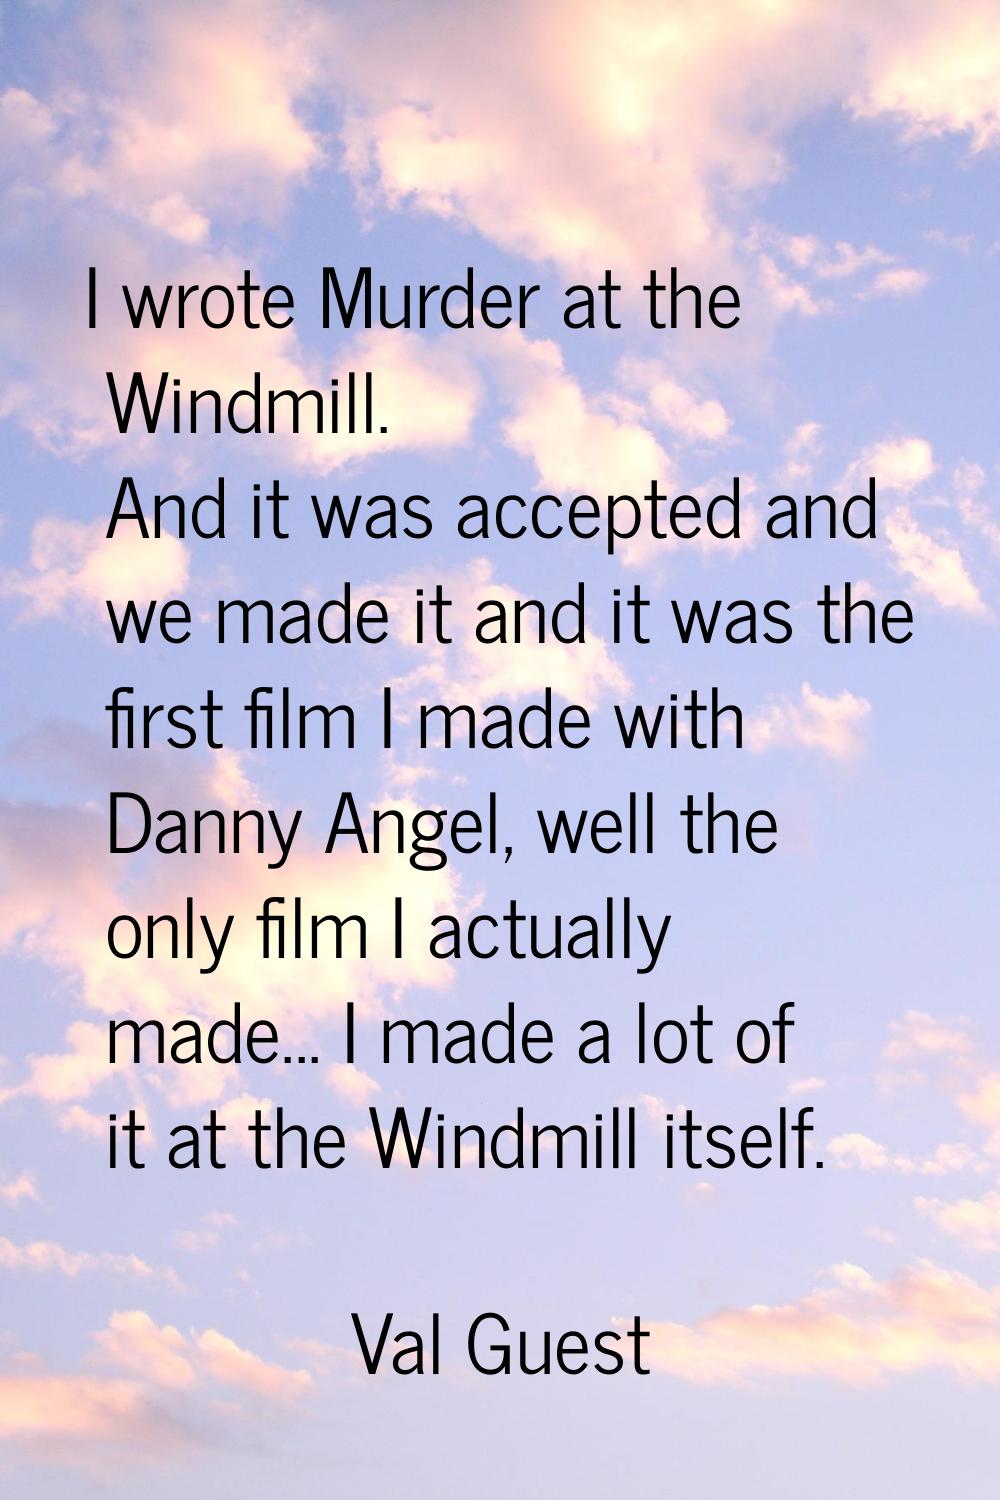 I wrote Murder at the Windmill. And it was accepted and we made it and it was the first film I made